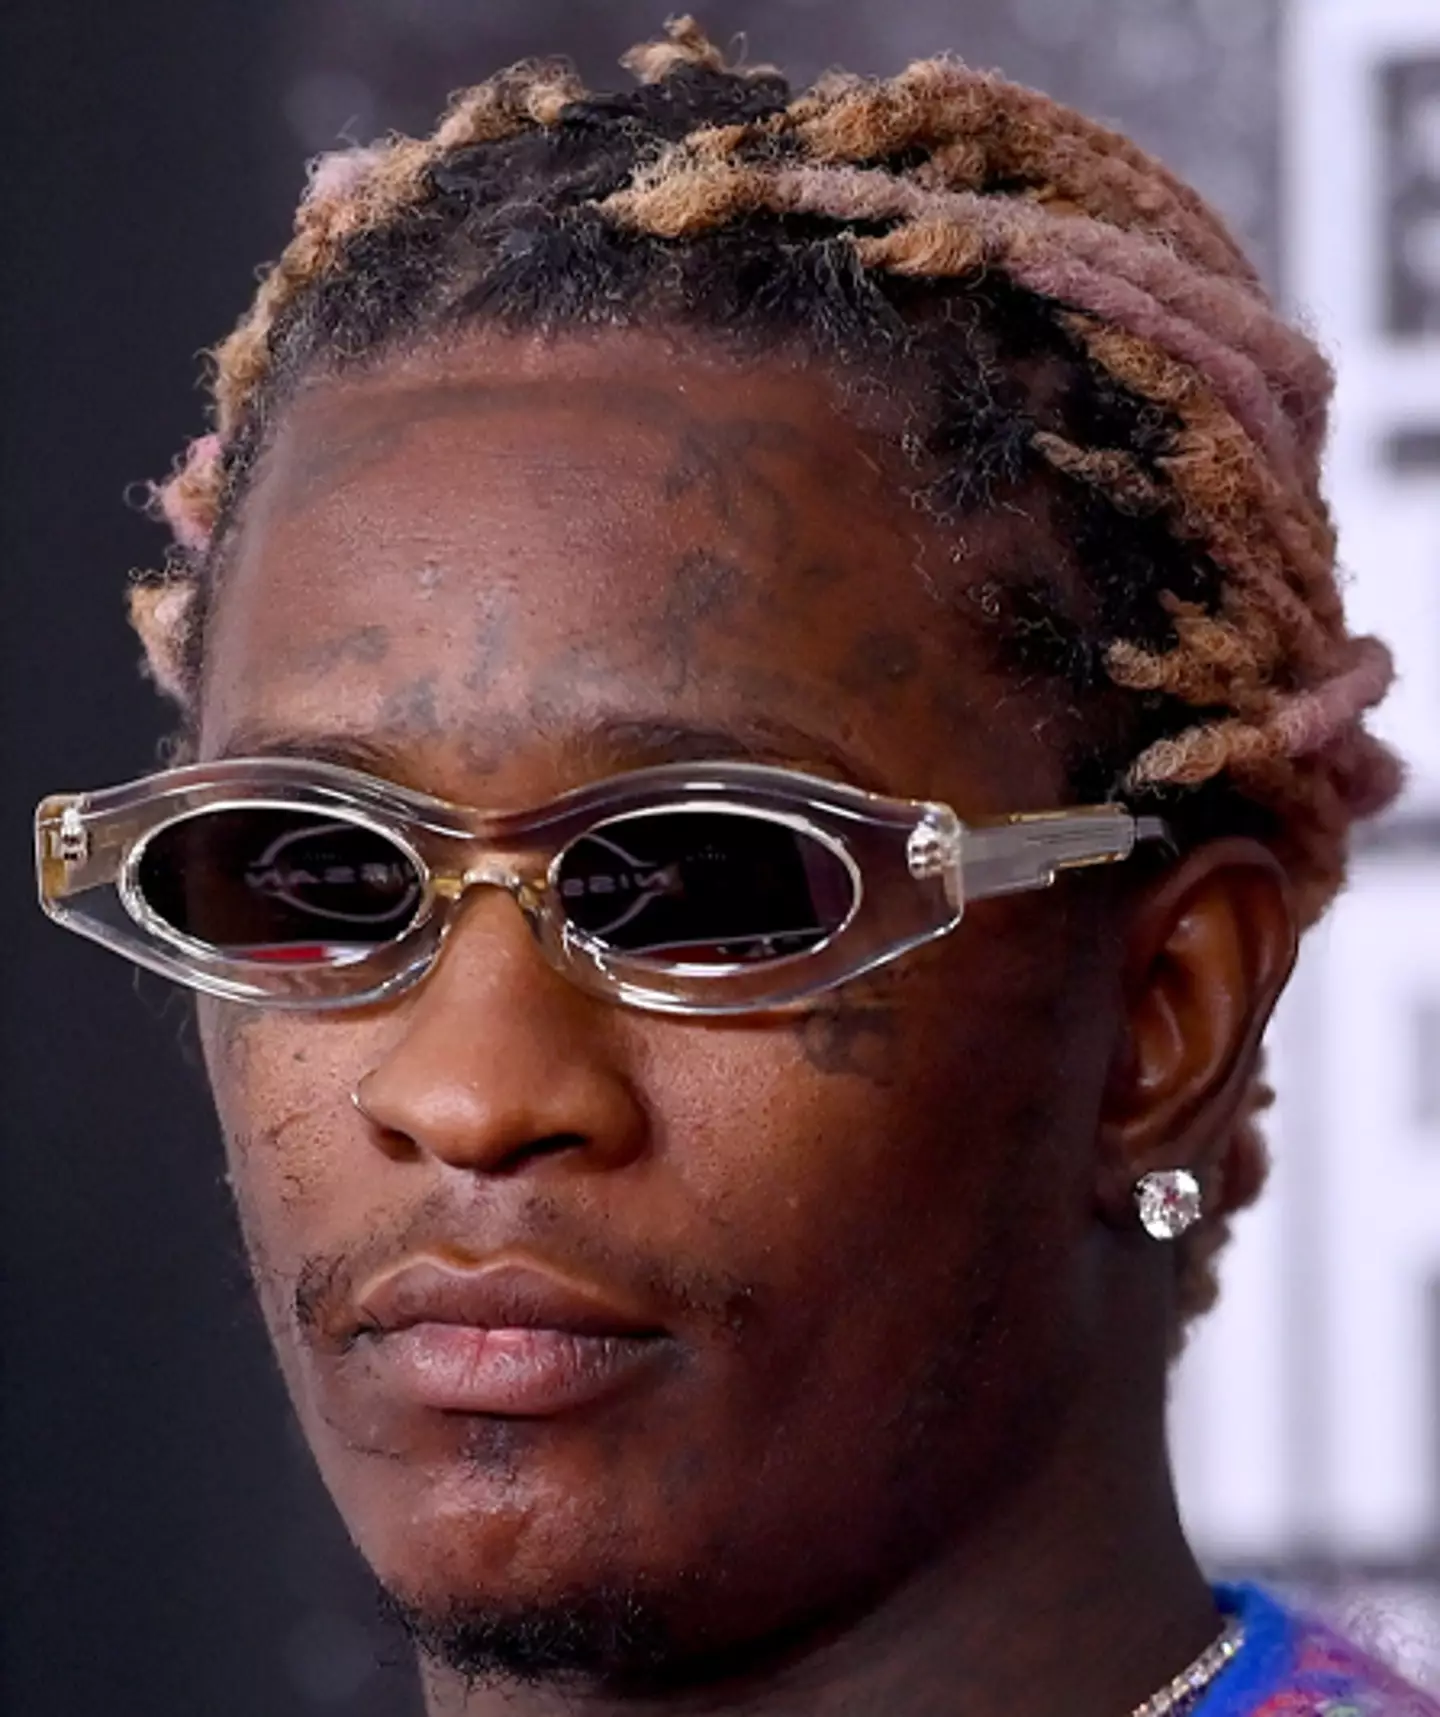 Young Thug remains in custody ahead of the trial.